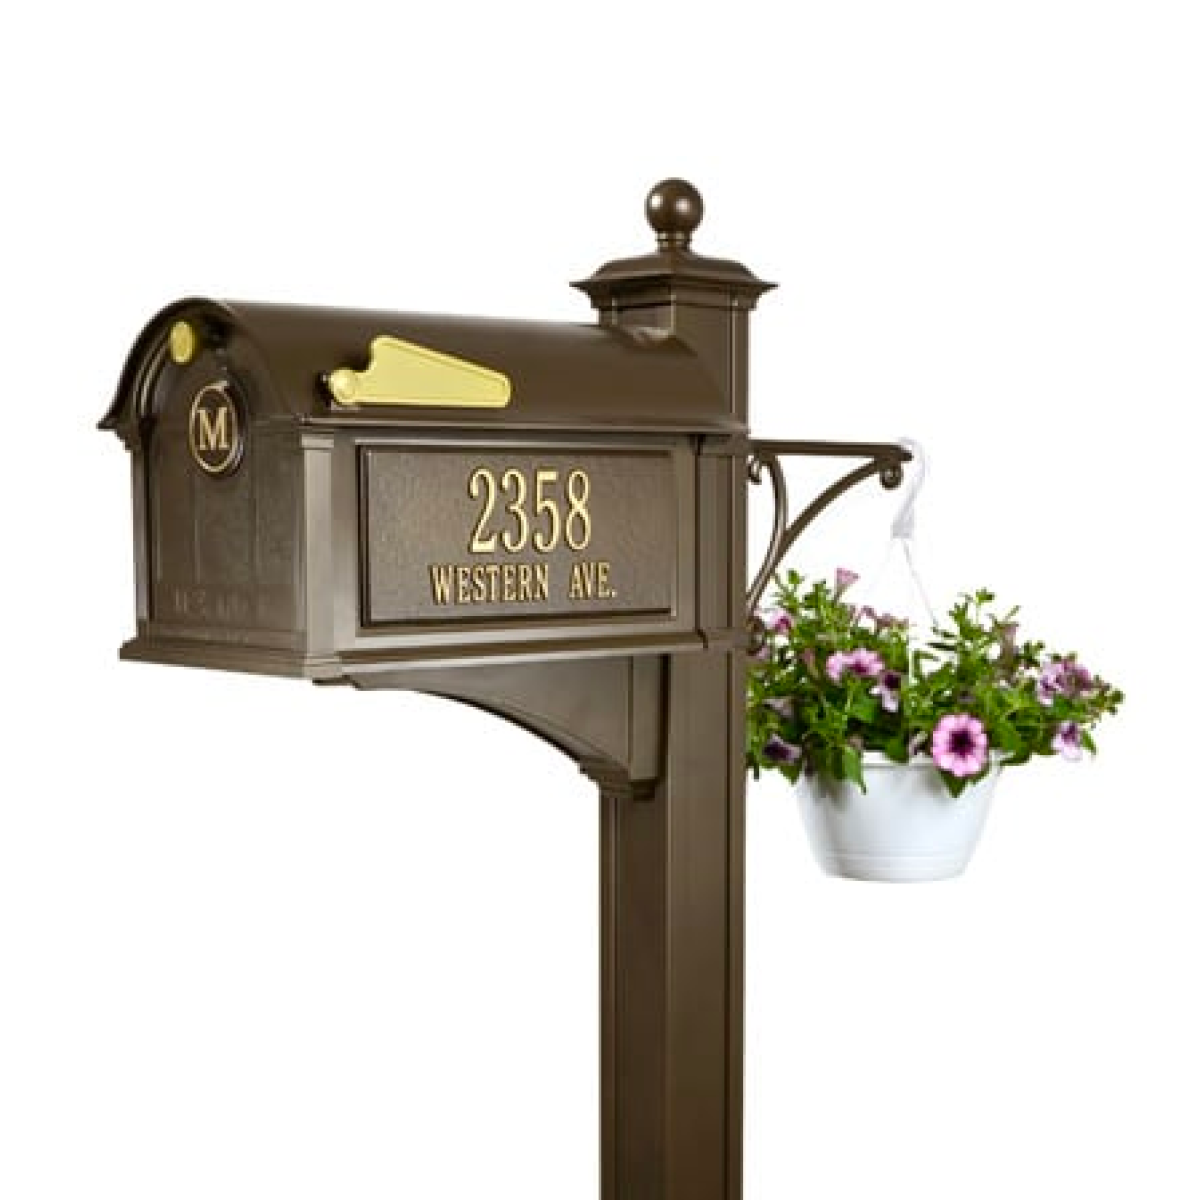 Whitehall Balmoral Monogram Mailbox Deluxe Package